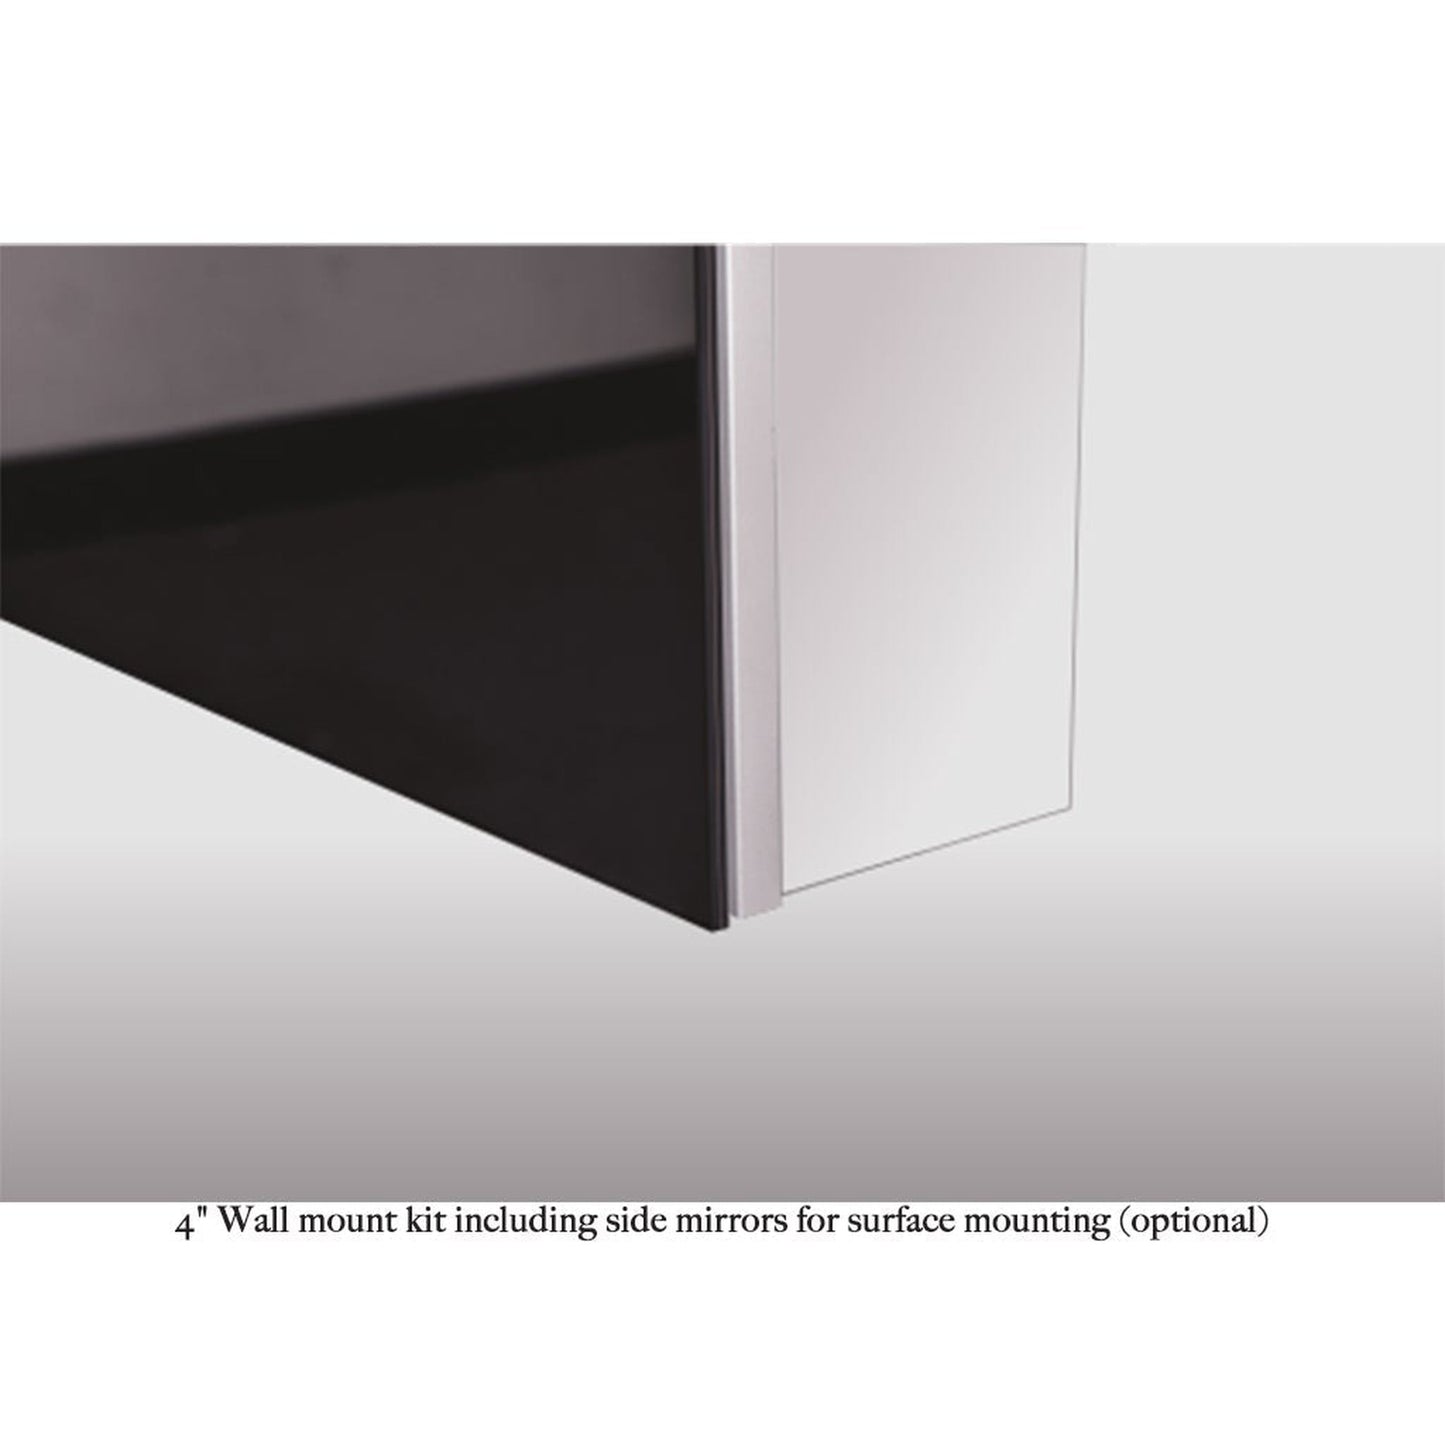 Sidler Tall 19" x 60" x 4" Full Length Right Hinged Mirror Door Anodized Aluminum Medicine Cabinet